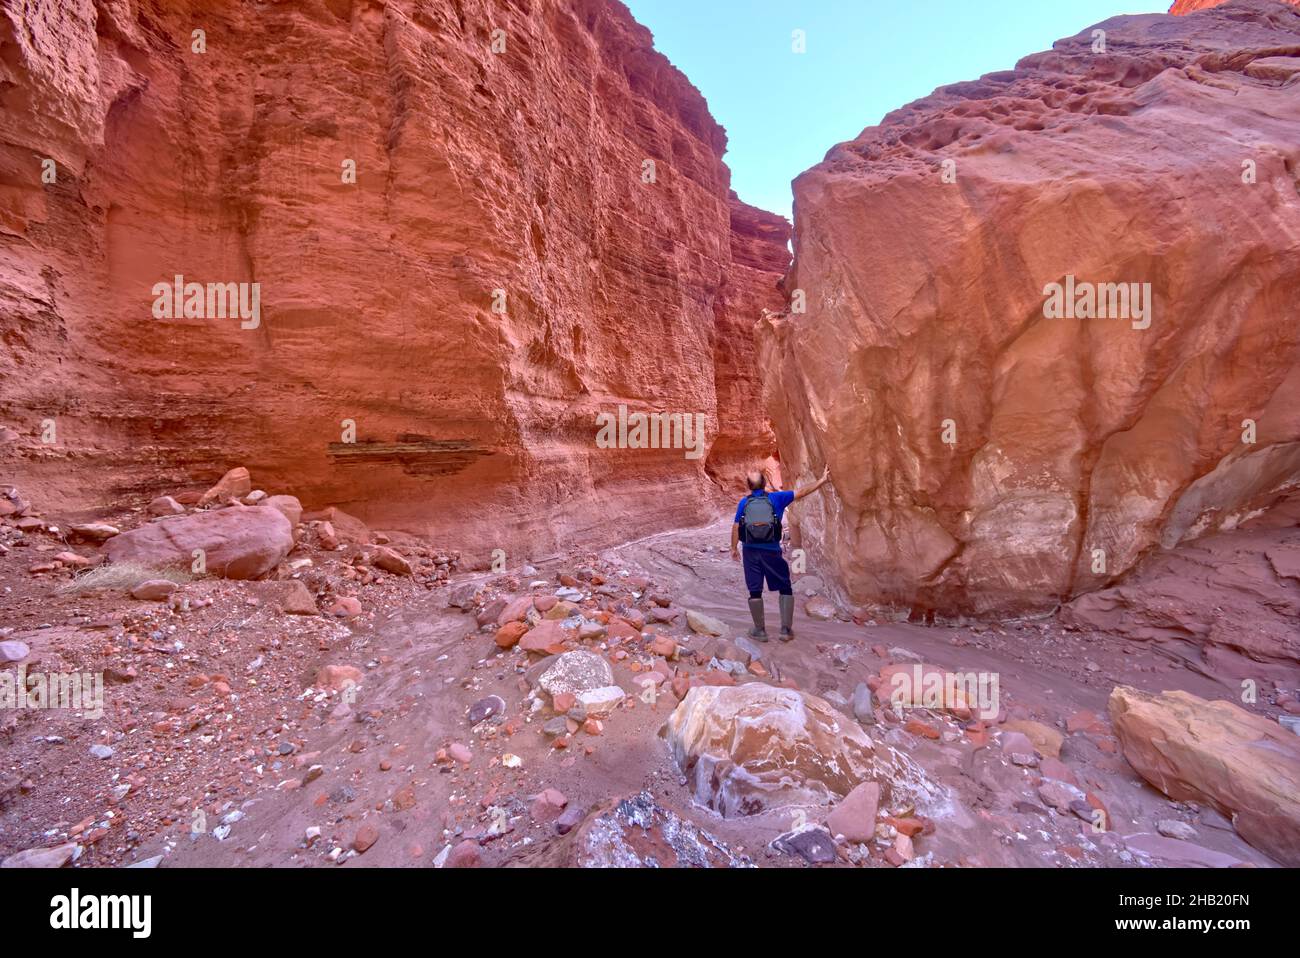 A hiker in a narrow sections of Chocolate Canyon at Vermilion Cliffs National Monument Arizona. The canyon is named for the chocolate color and textur Stock Photo